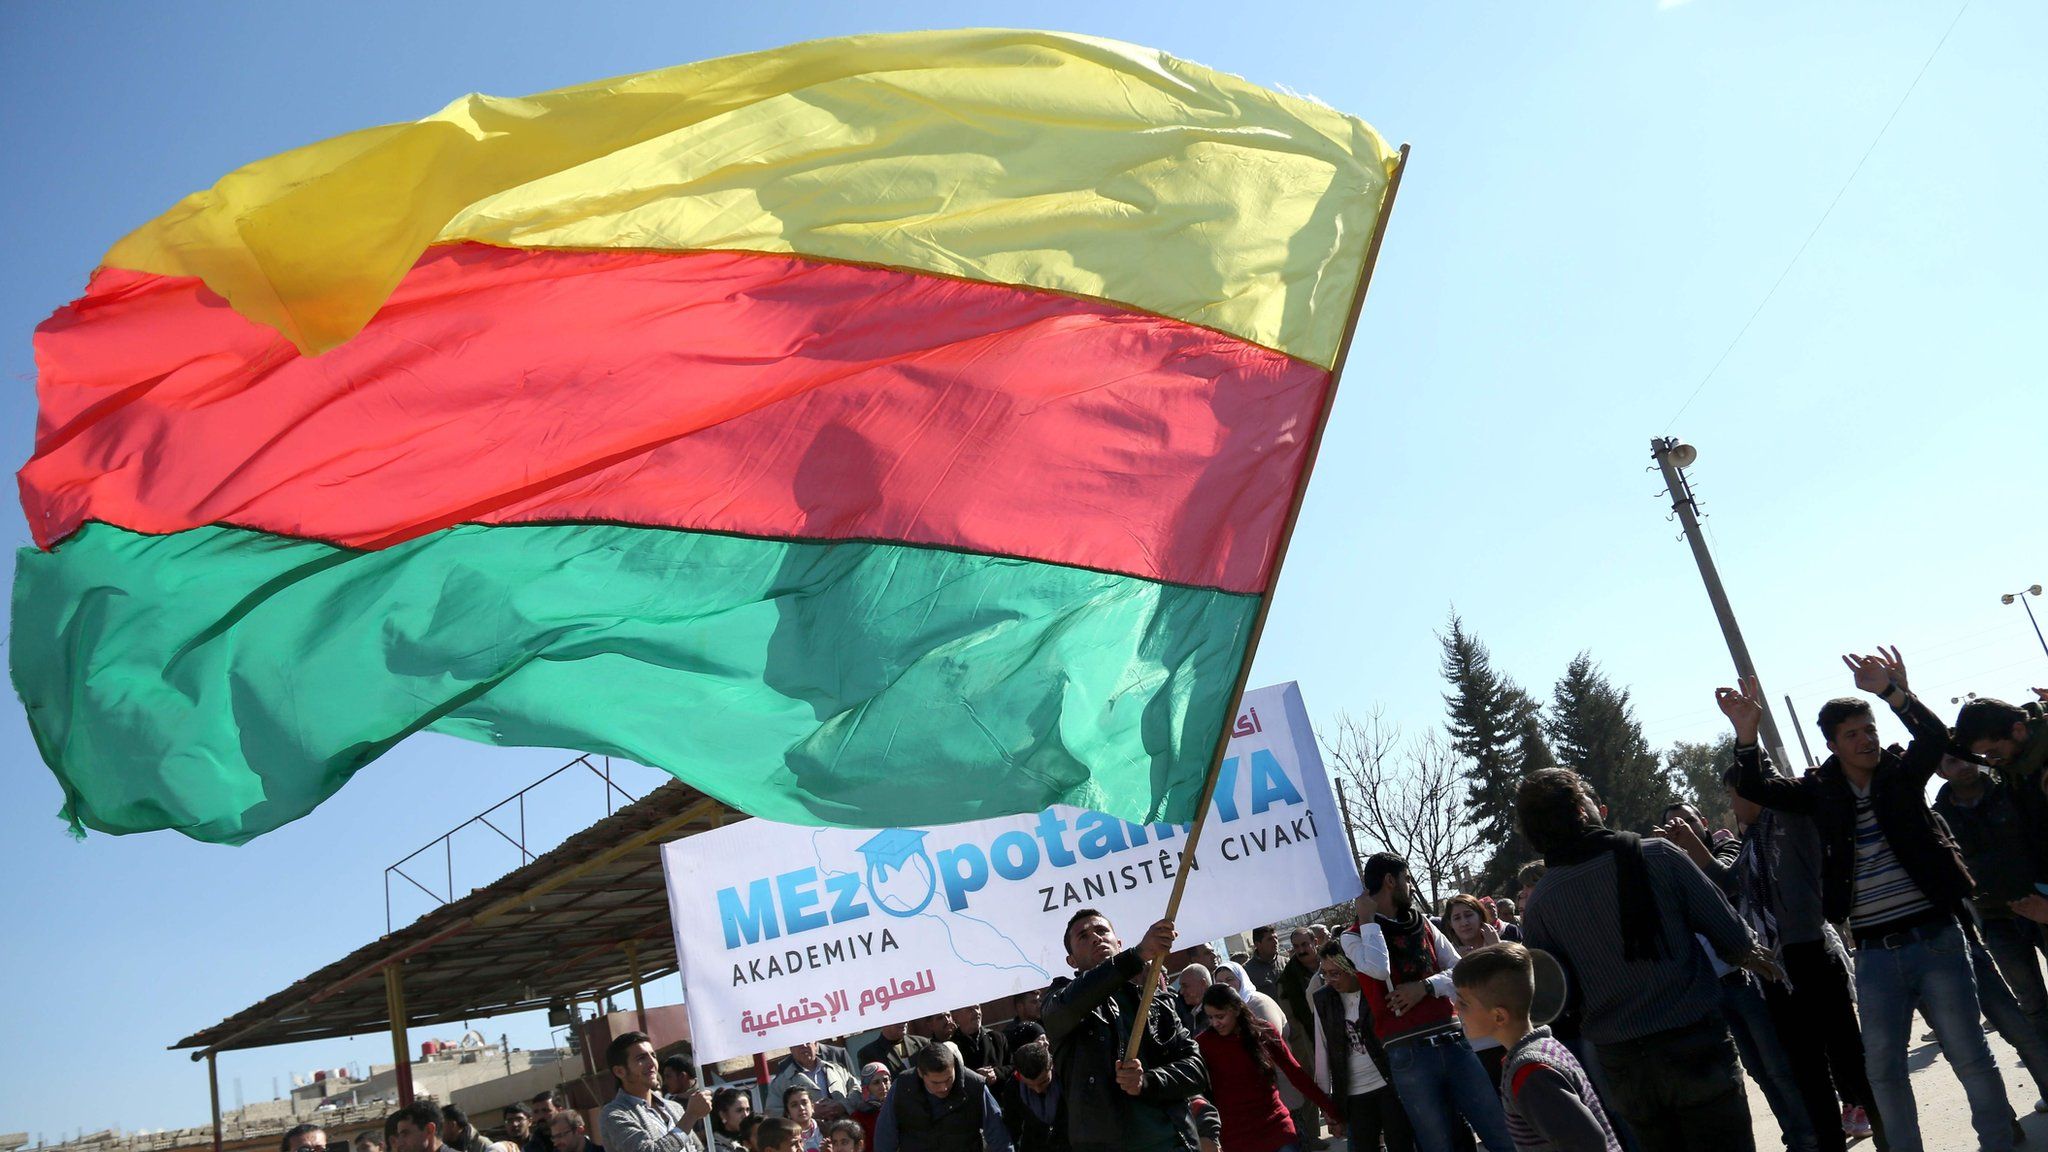 A Kurdish man waves the flag of the Kurdish Democratic Union Party (PYD) at a protest in Qamishli, Syria (4 February 2016)